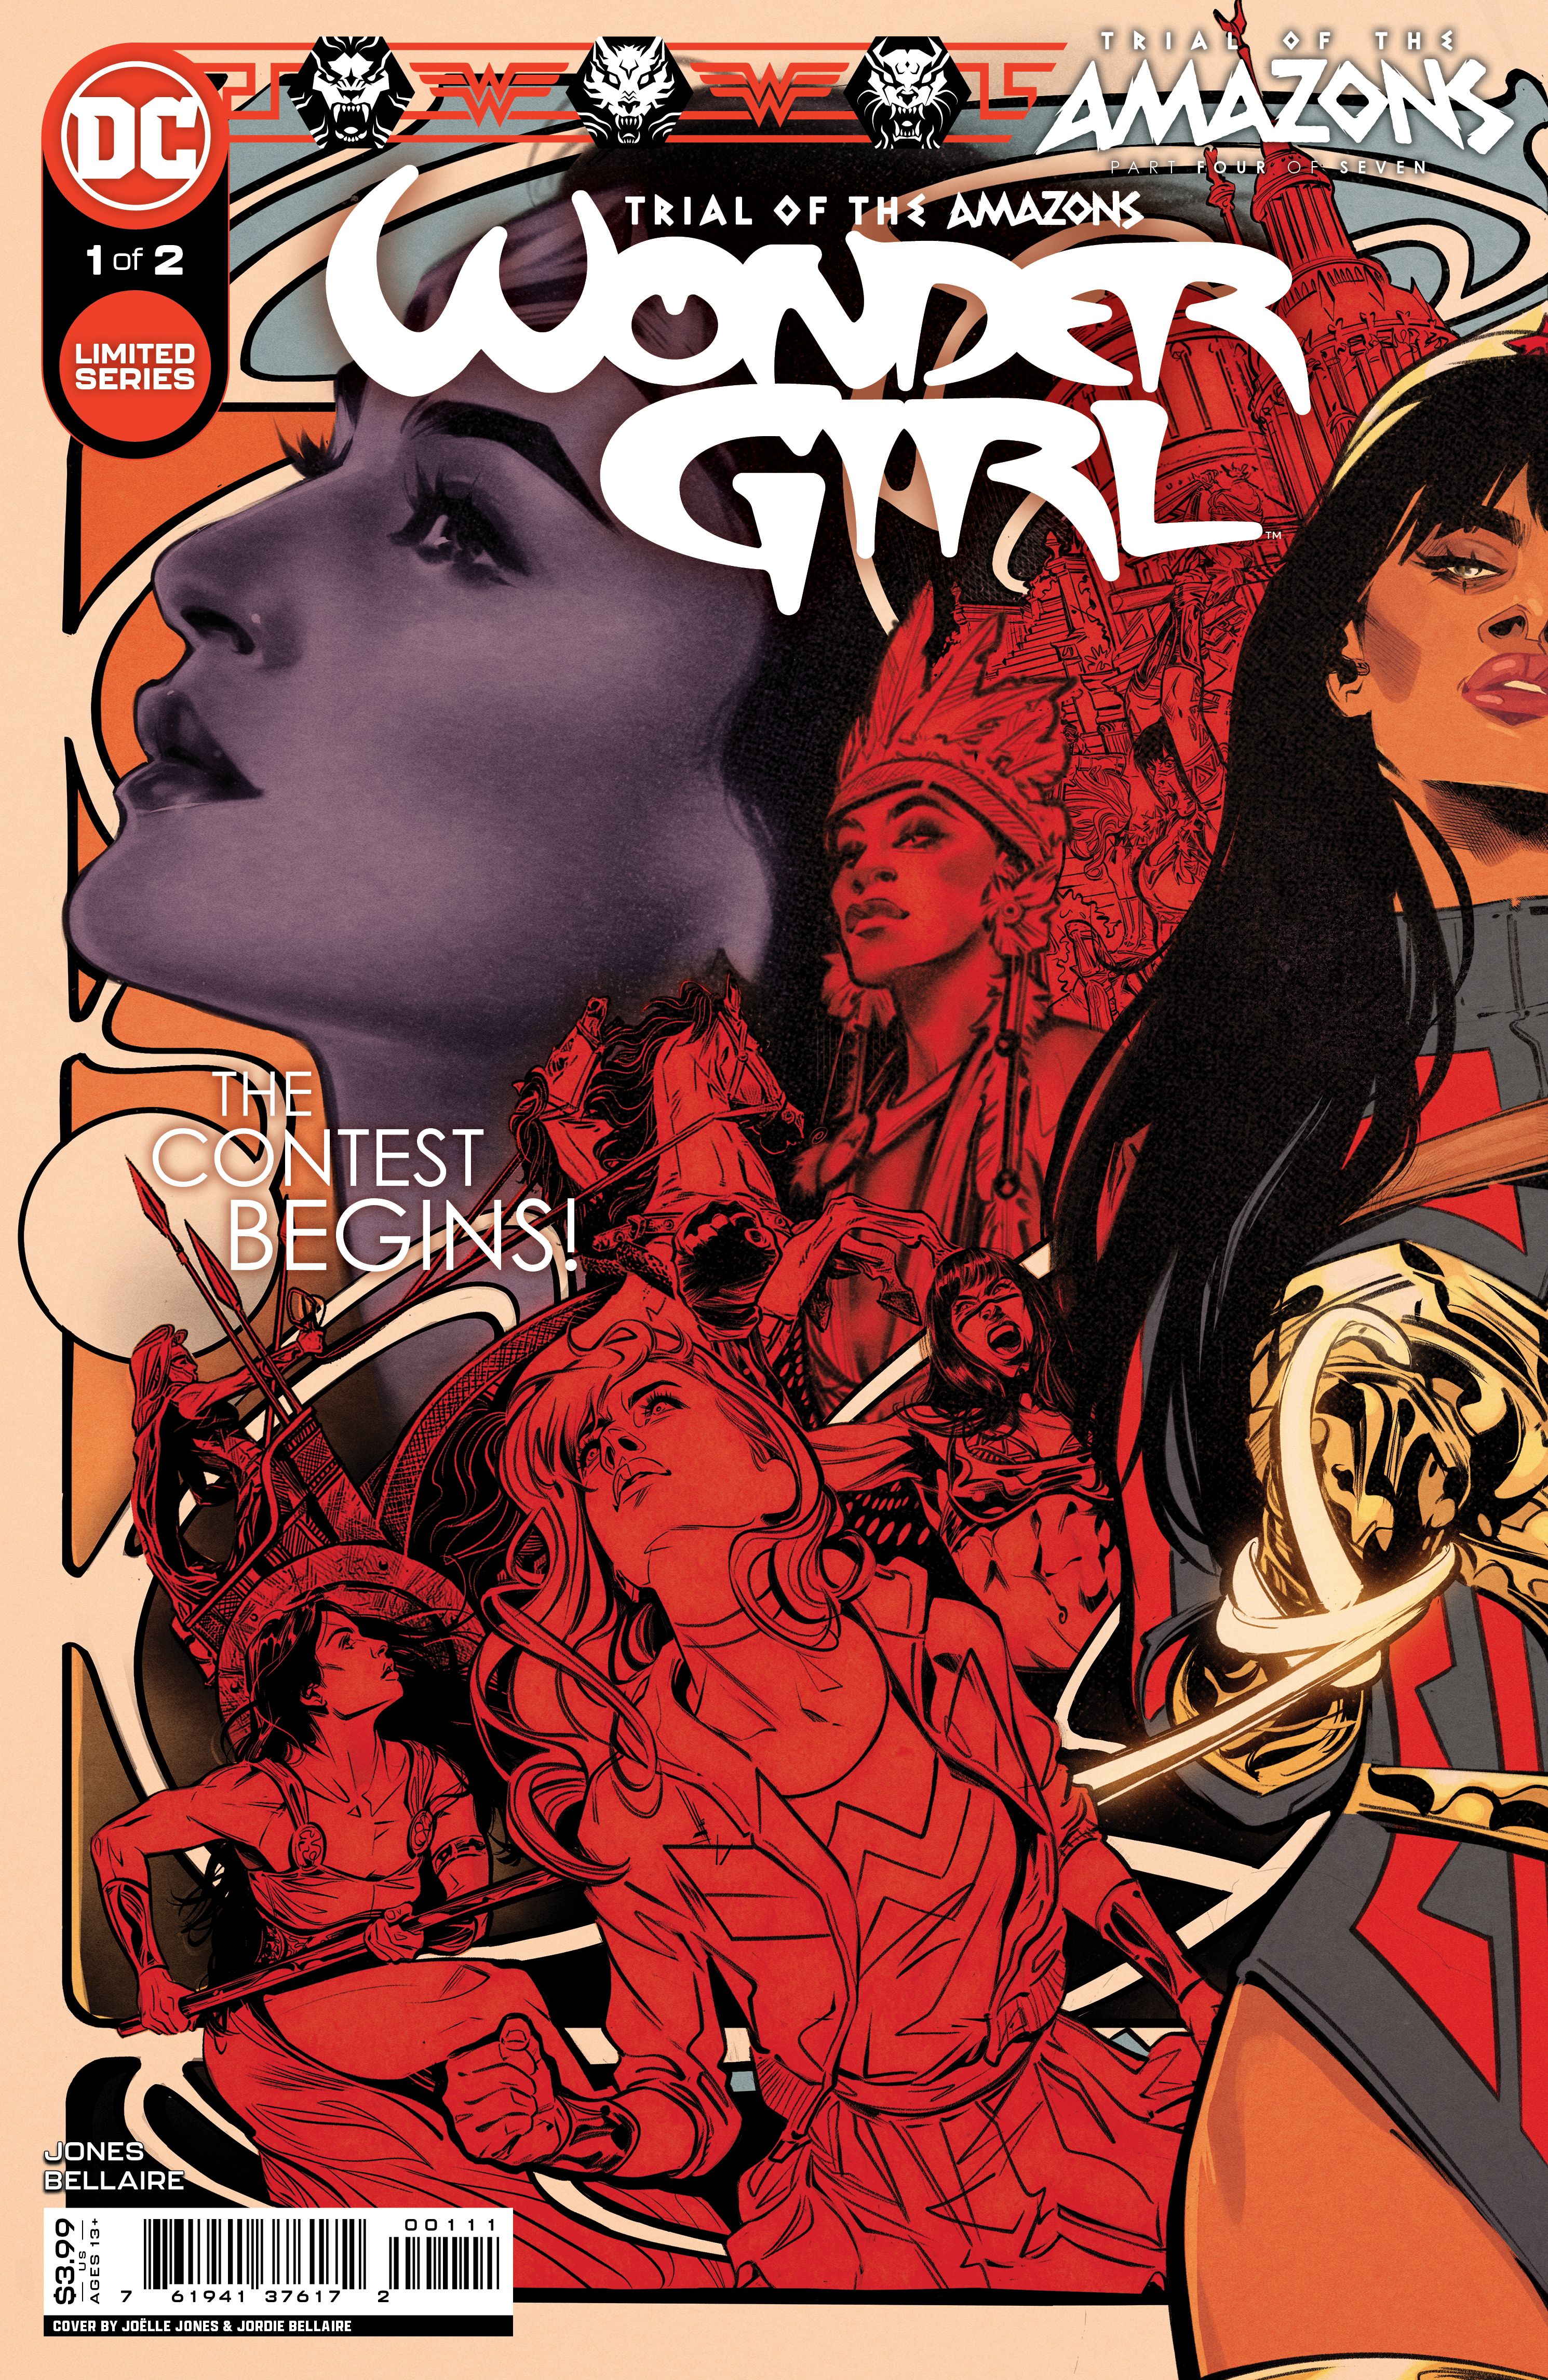 Trial of the Amazons: Wonder Girl #1 Comic